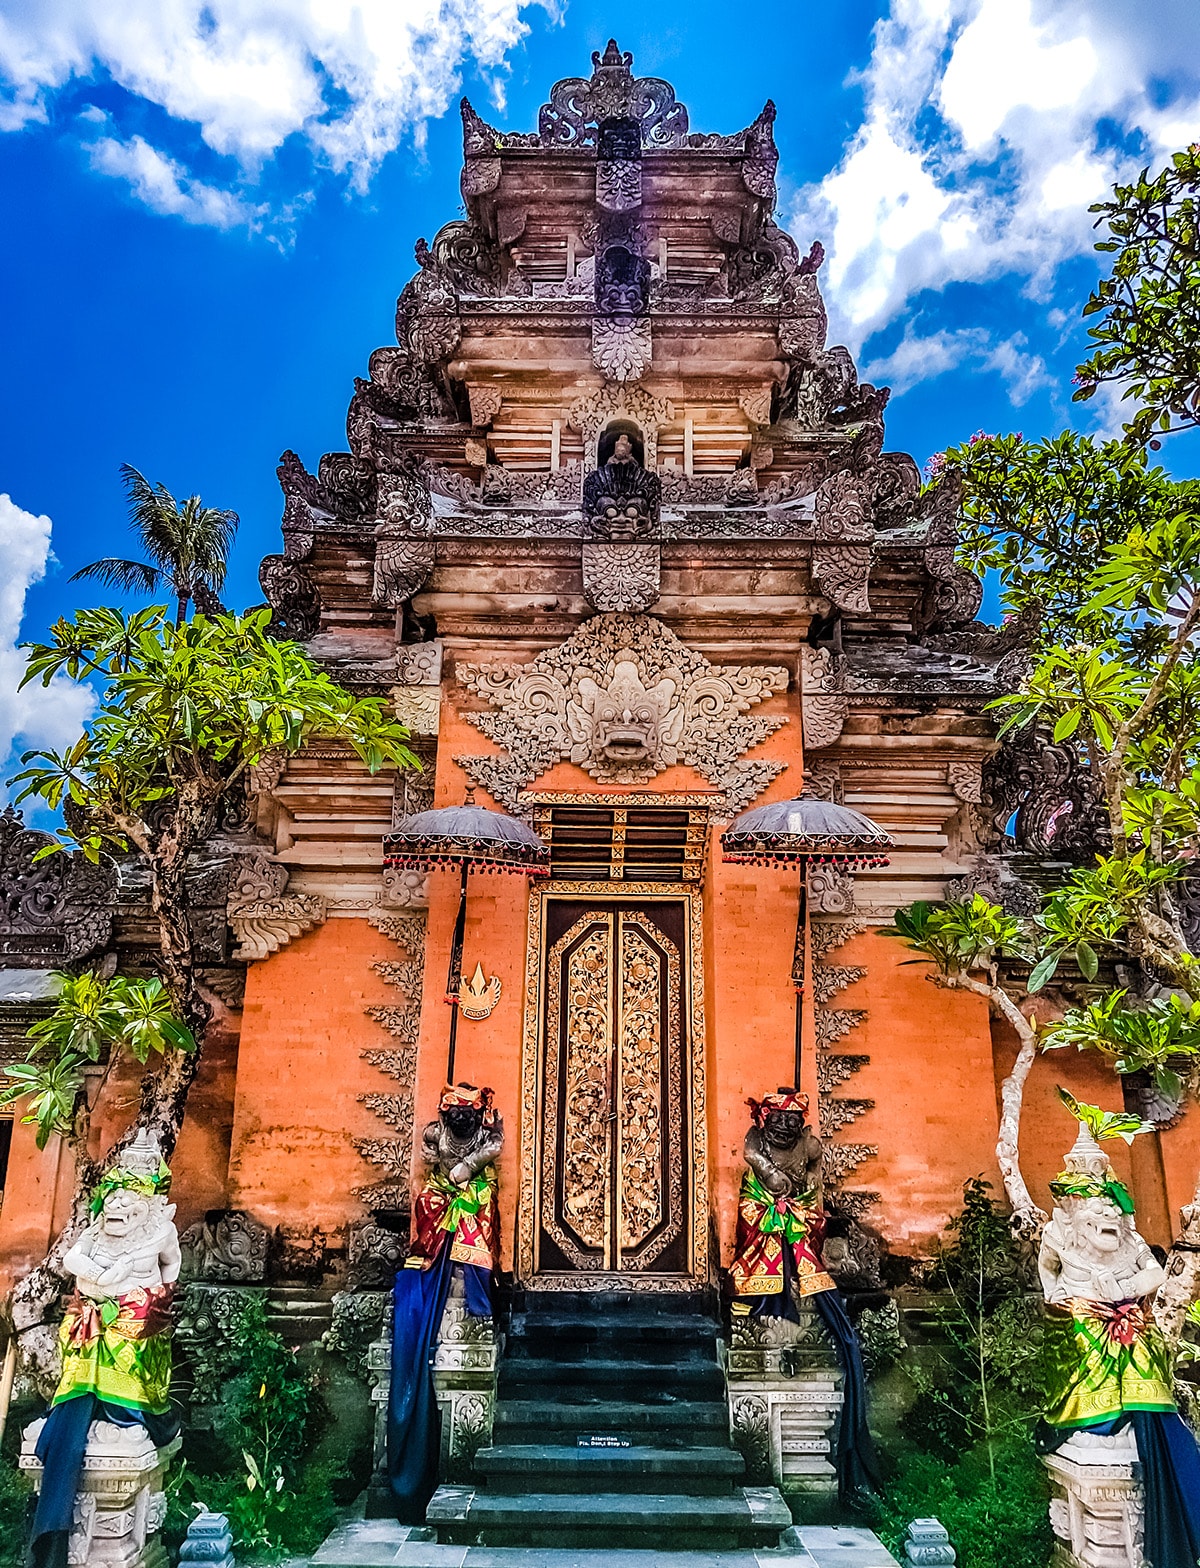 A doorway with typical traditional Balinese architectural design